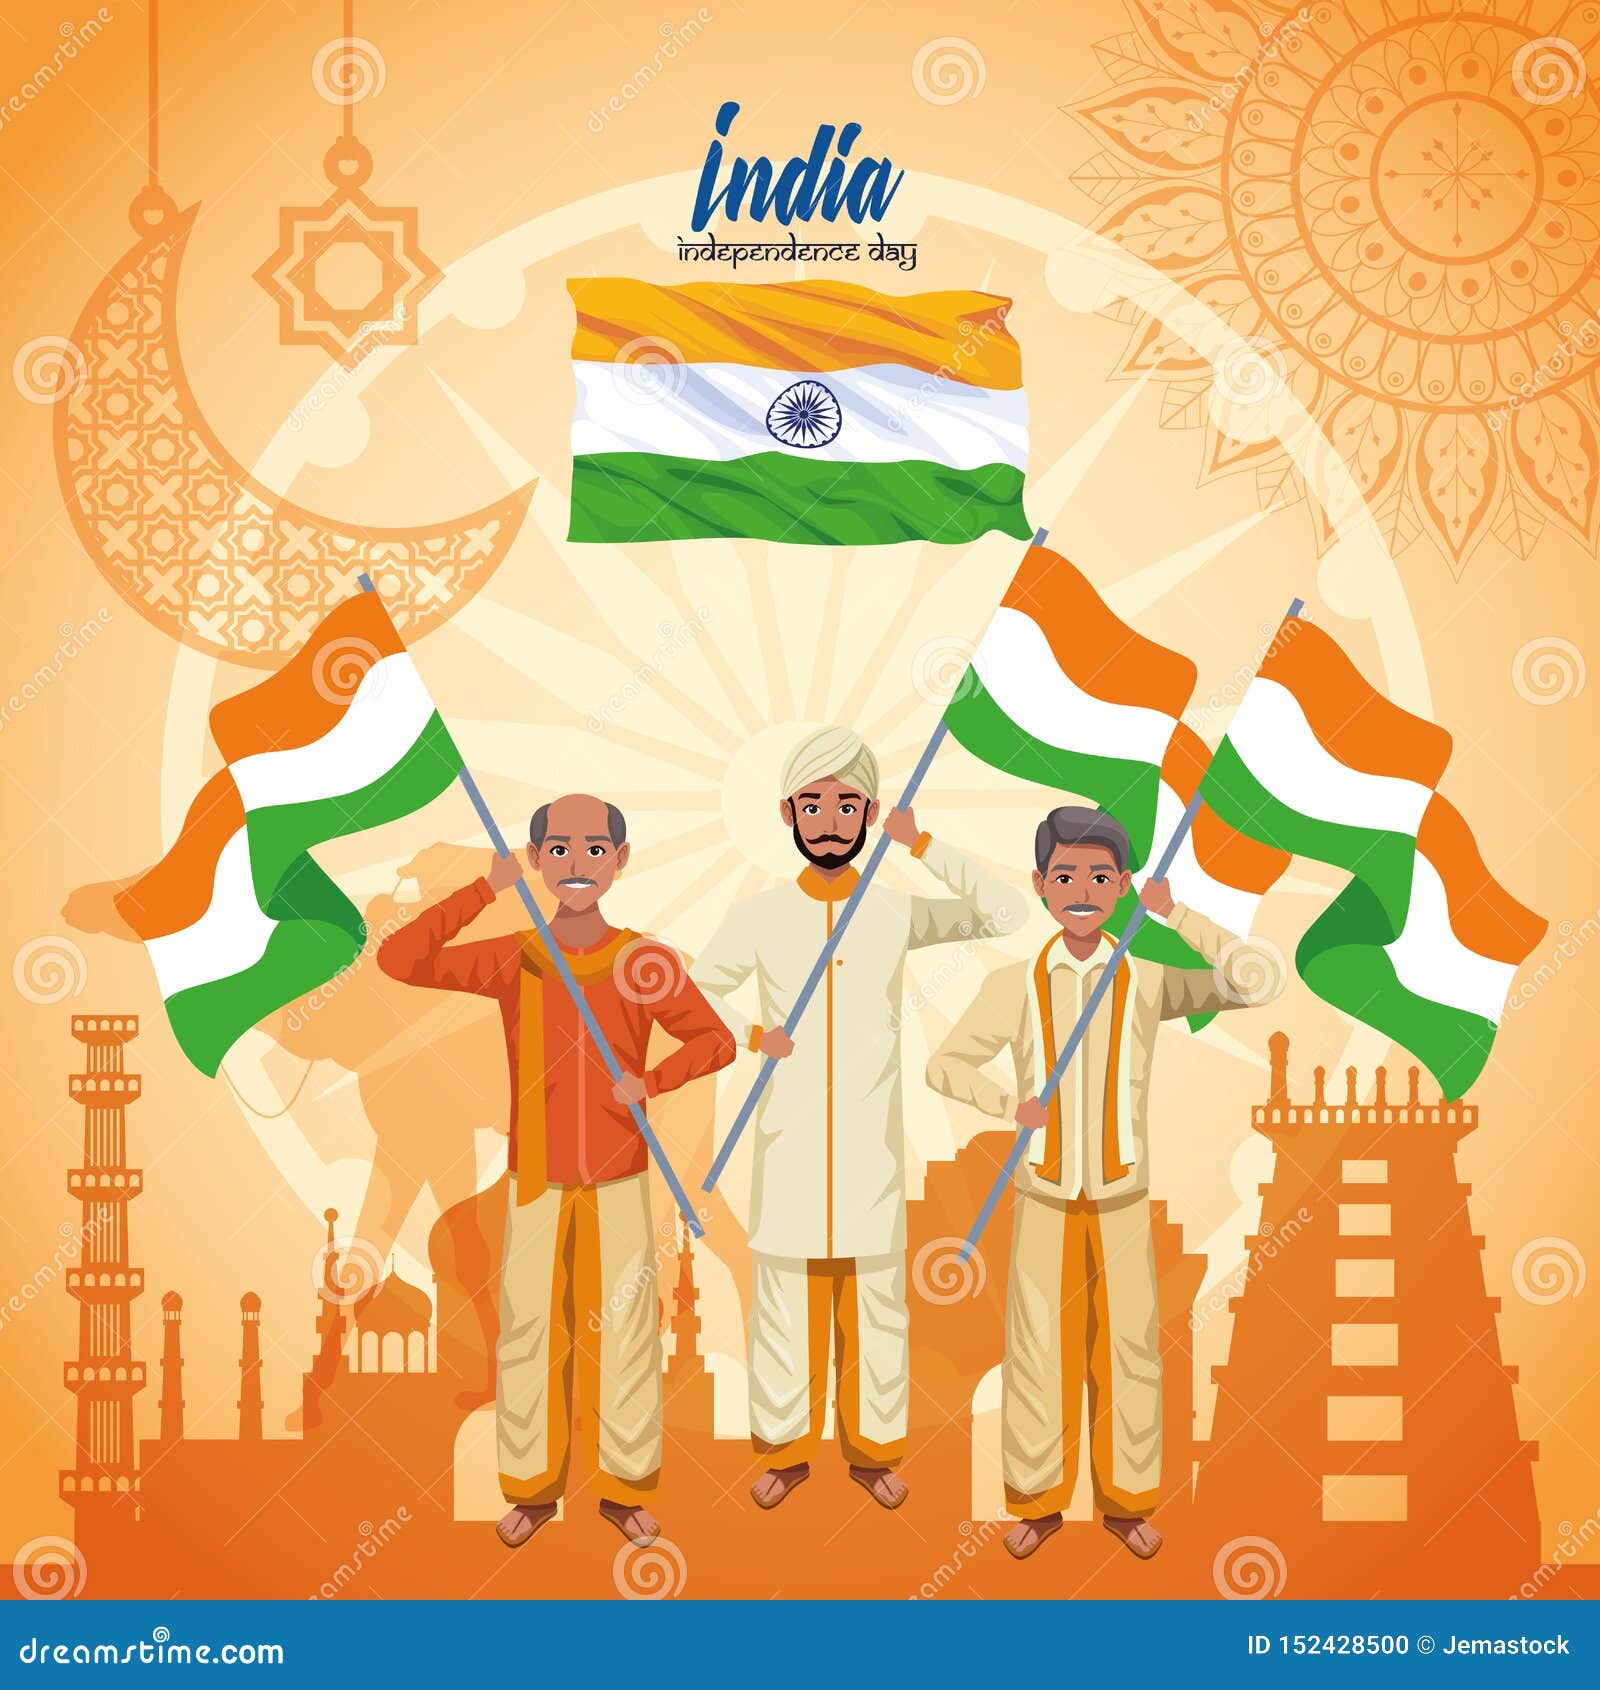 India Independence Day Card Stock Vector - Illustration of nation, honor:  152428500